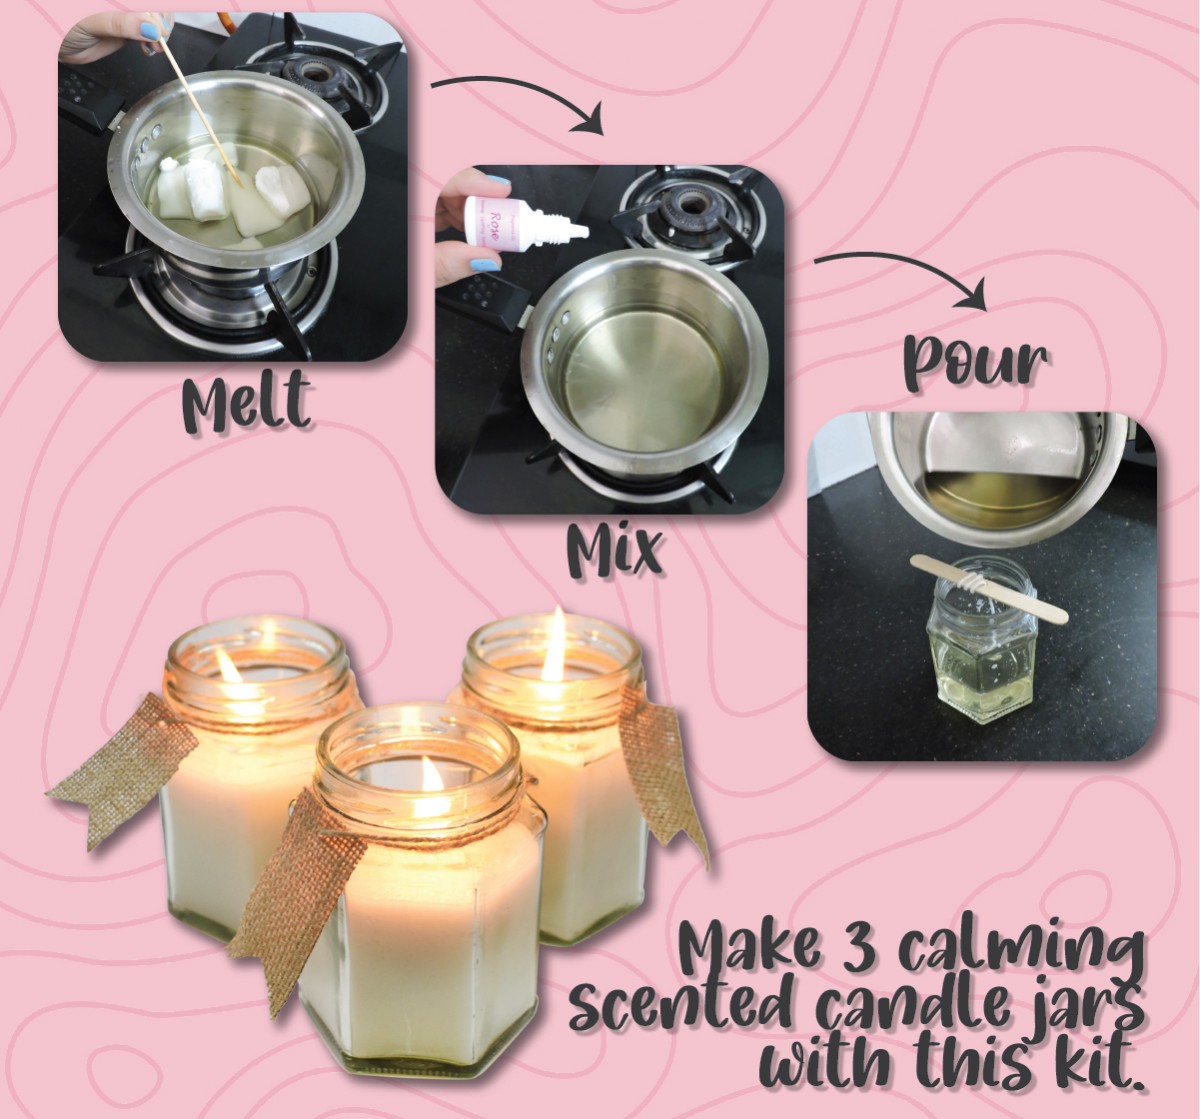 Kalakaram Scented Jar Candle Making Kit, Make 3 Scented Jar Candles from this Kit, Kids and Adults DIY Kit, Gift For Kids, 10Y+, Multicolour